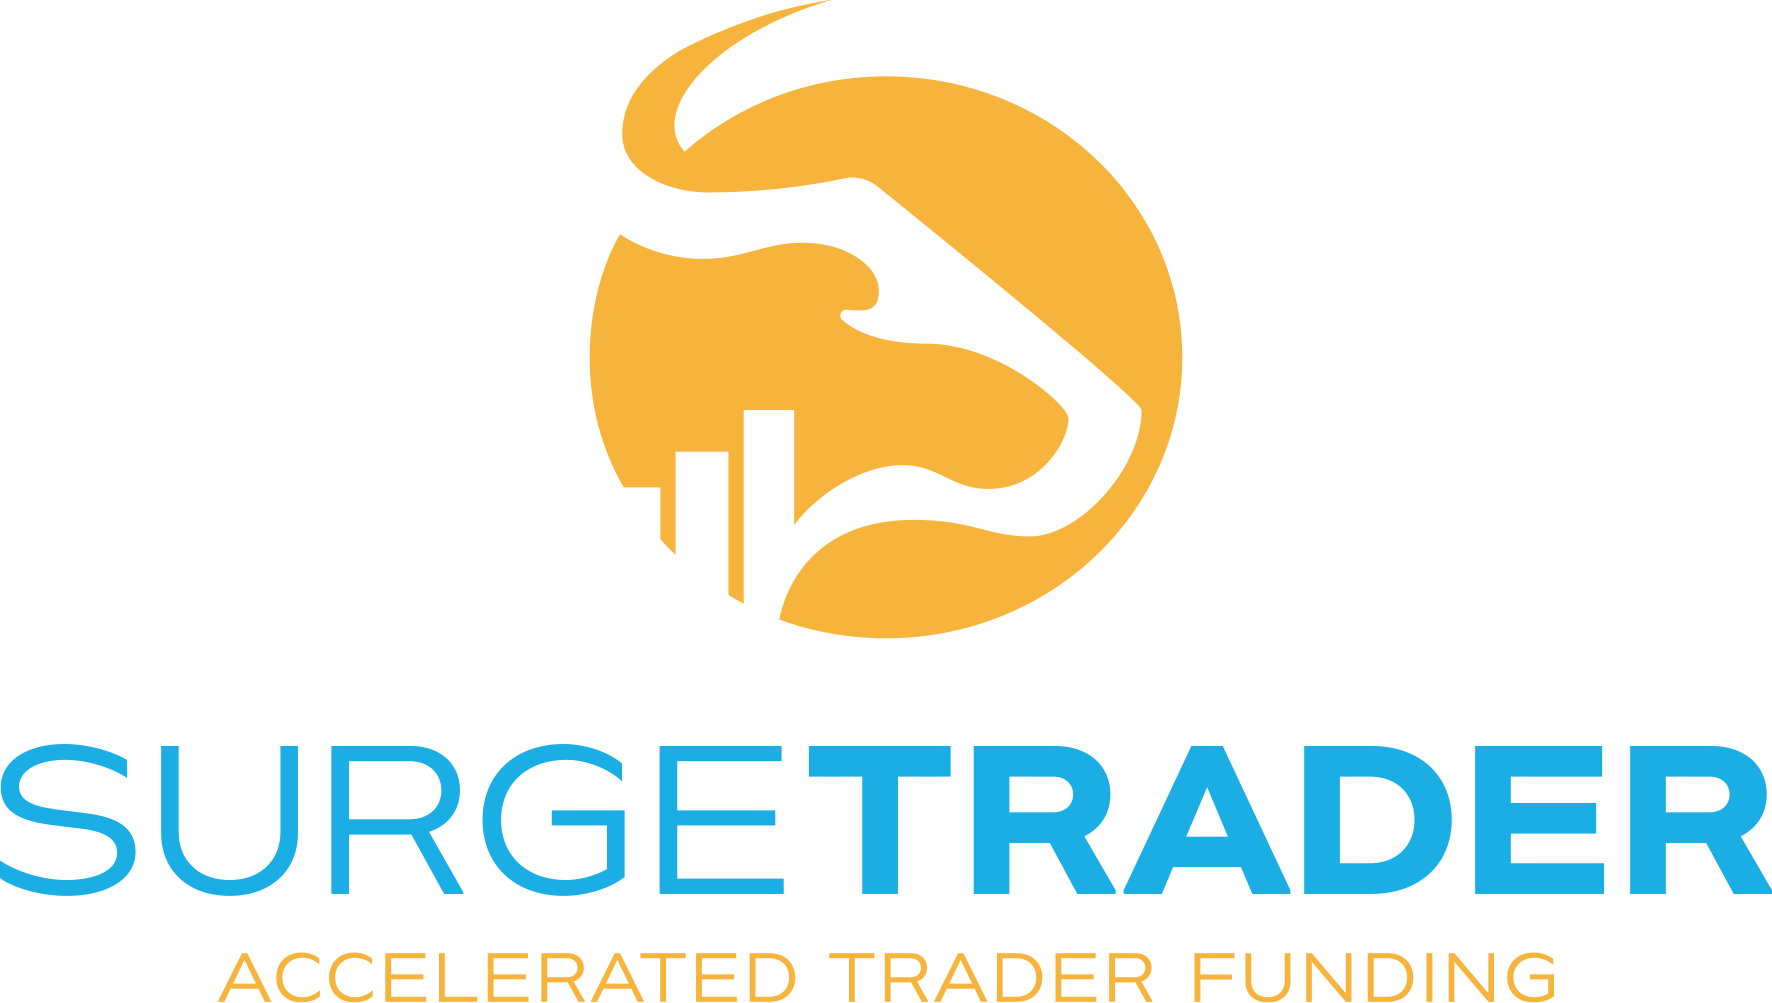 Funded Trading Accounts